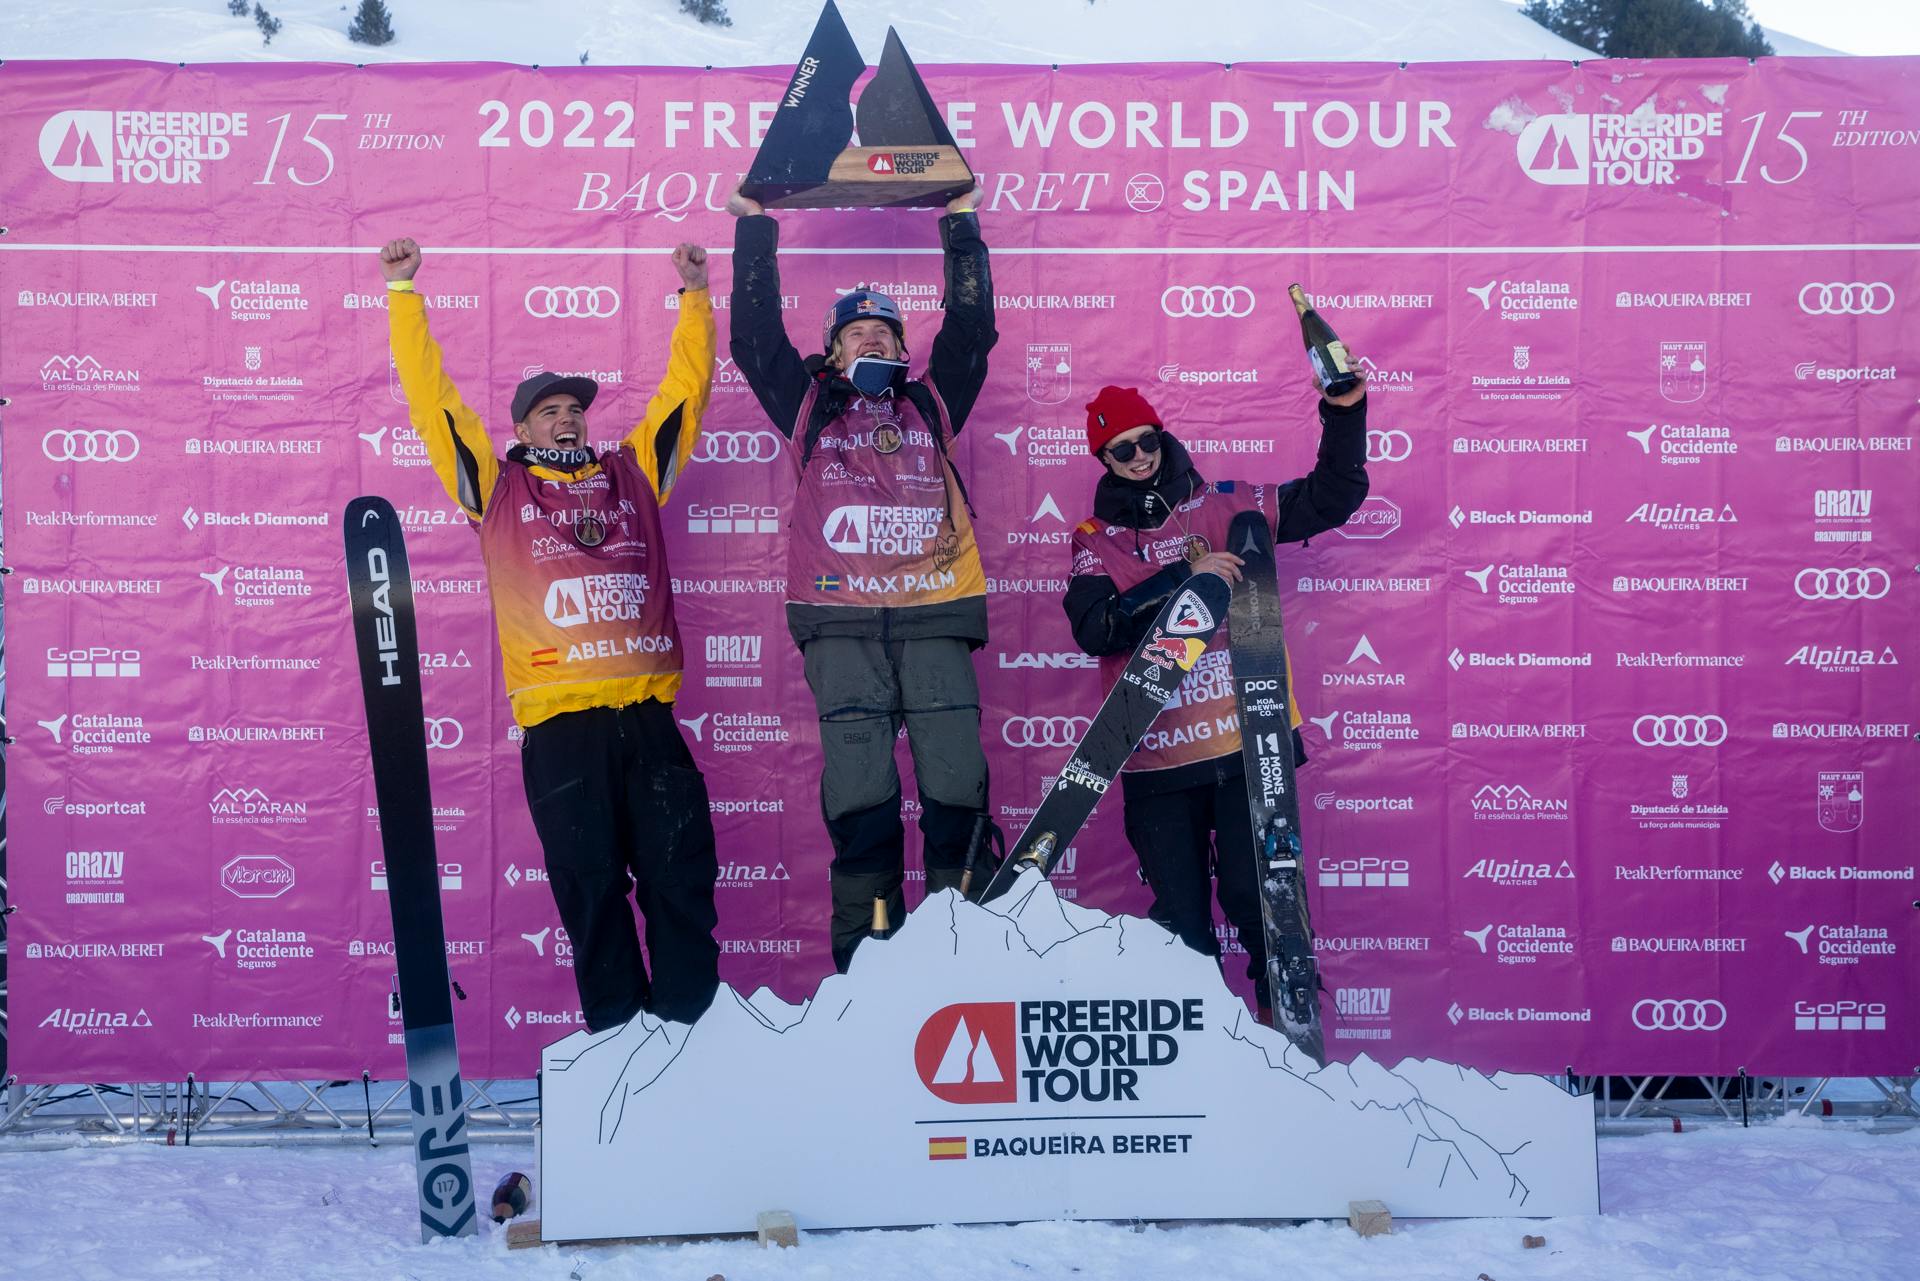 The three male skiers who came in on top stand on the podium with their skis and hold up trophies. 